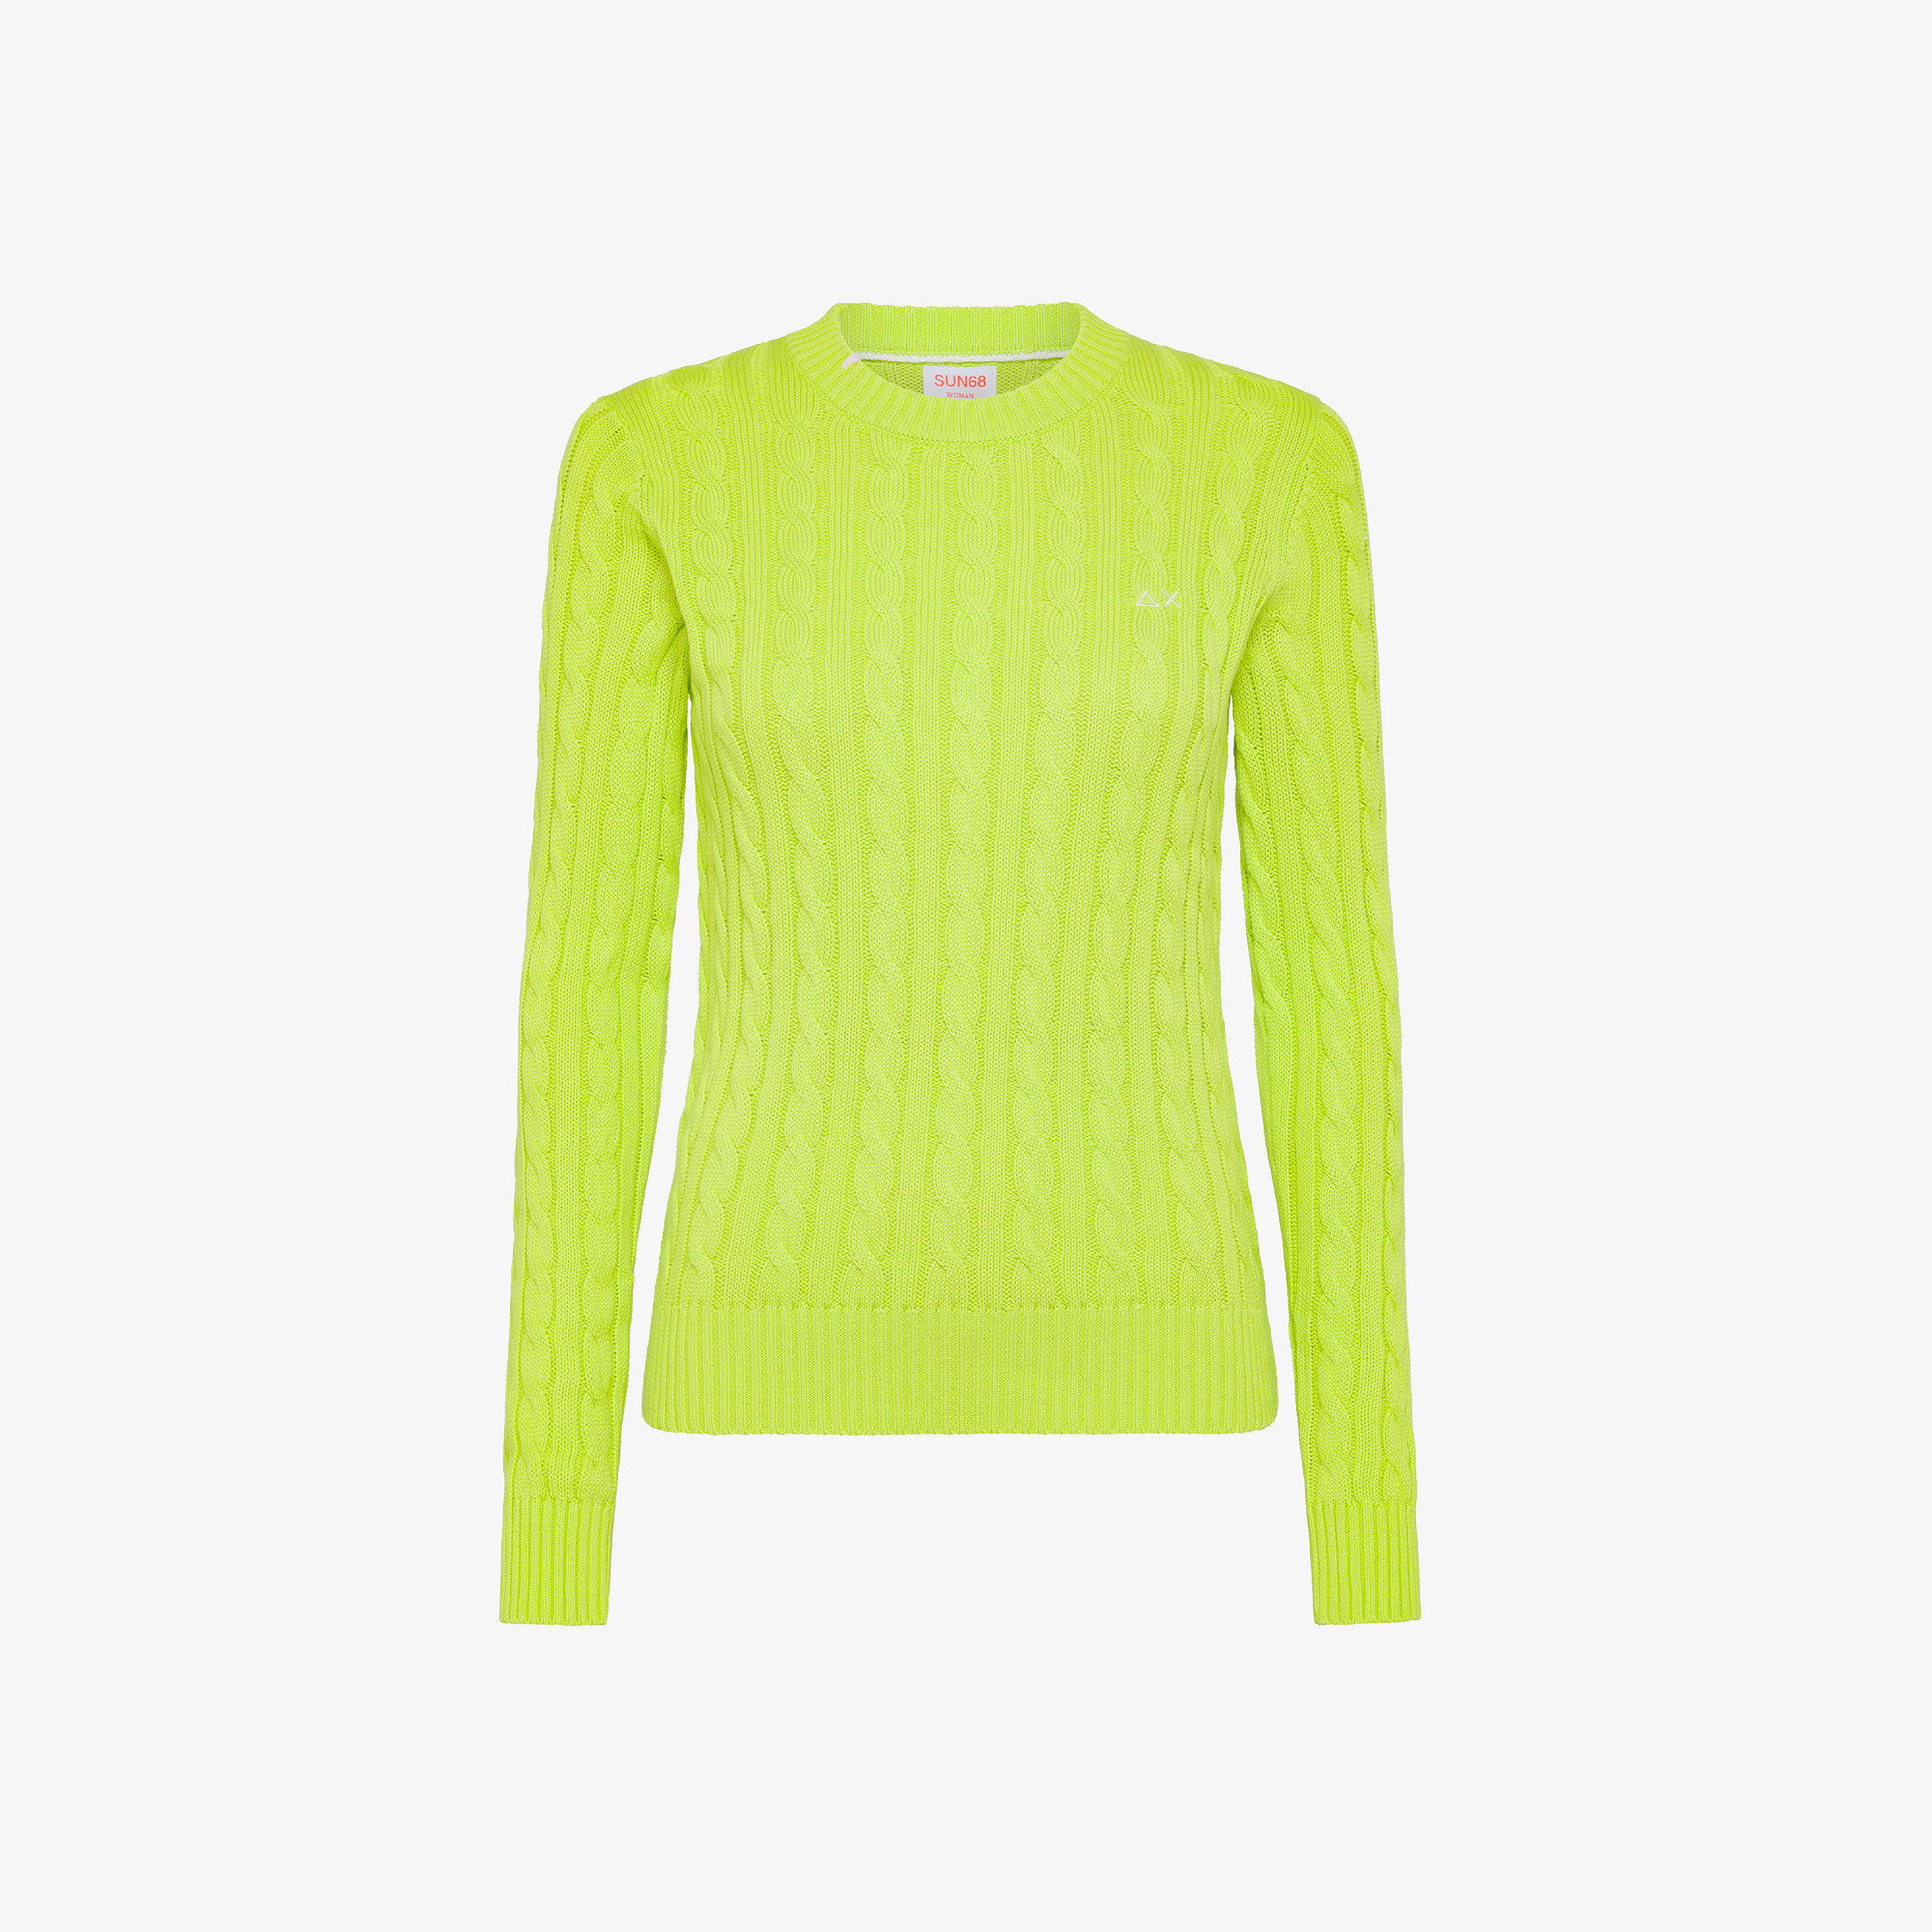 ROUND NECK CABLE L/S LIME